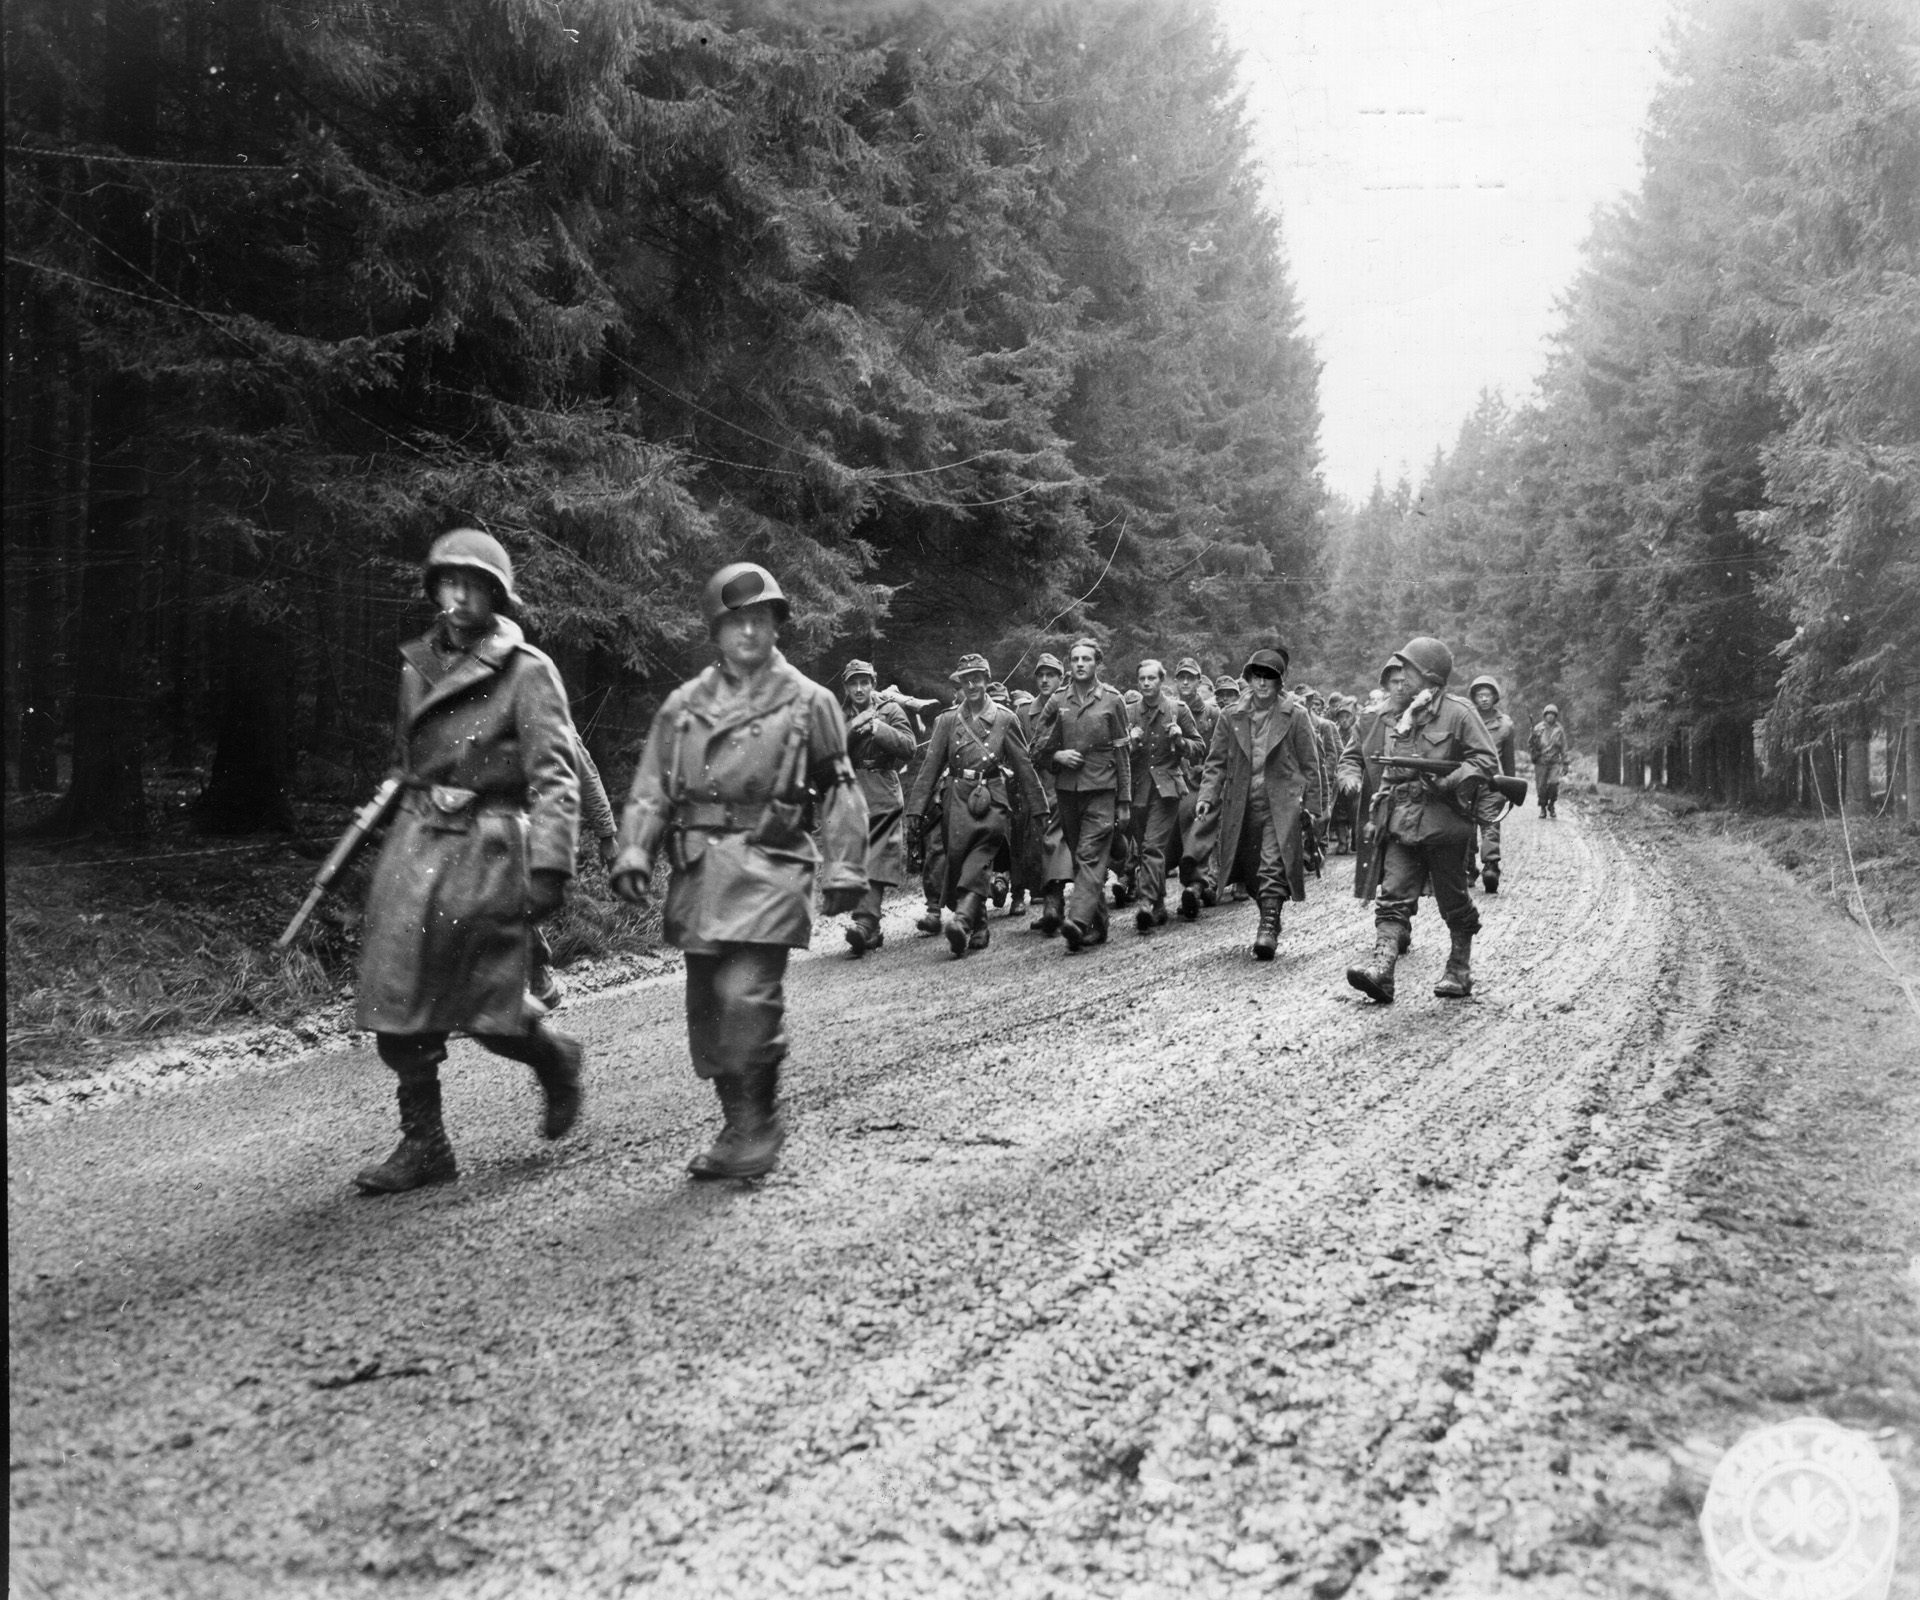 Members of the 28th Infantry Division escort a group of German prisoners captured in Schmidt to the rear, November 3, 1944. The Germans retook the town the next day.